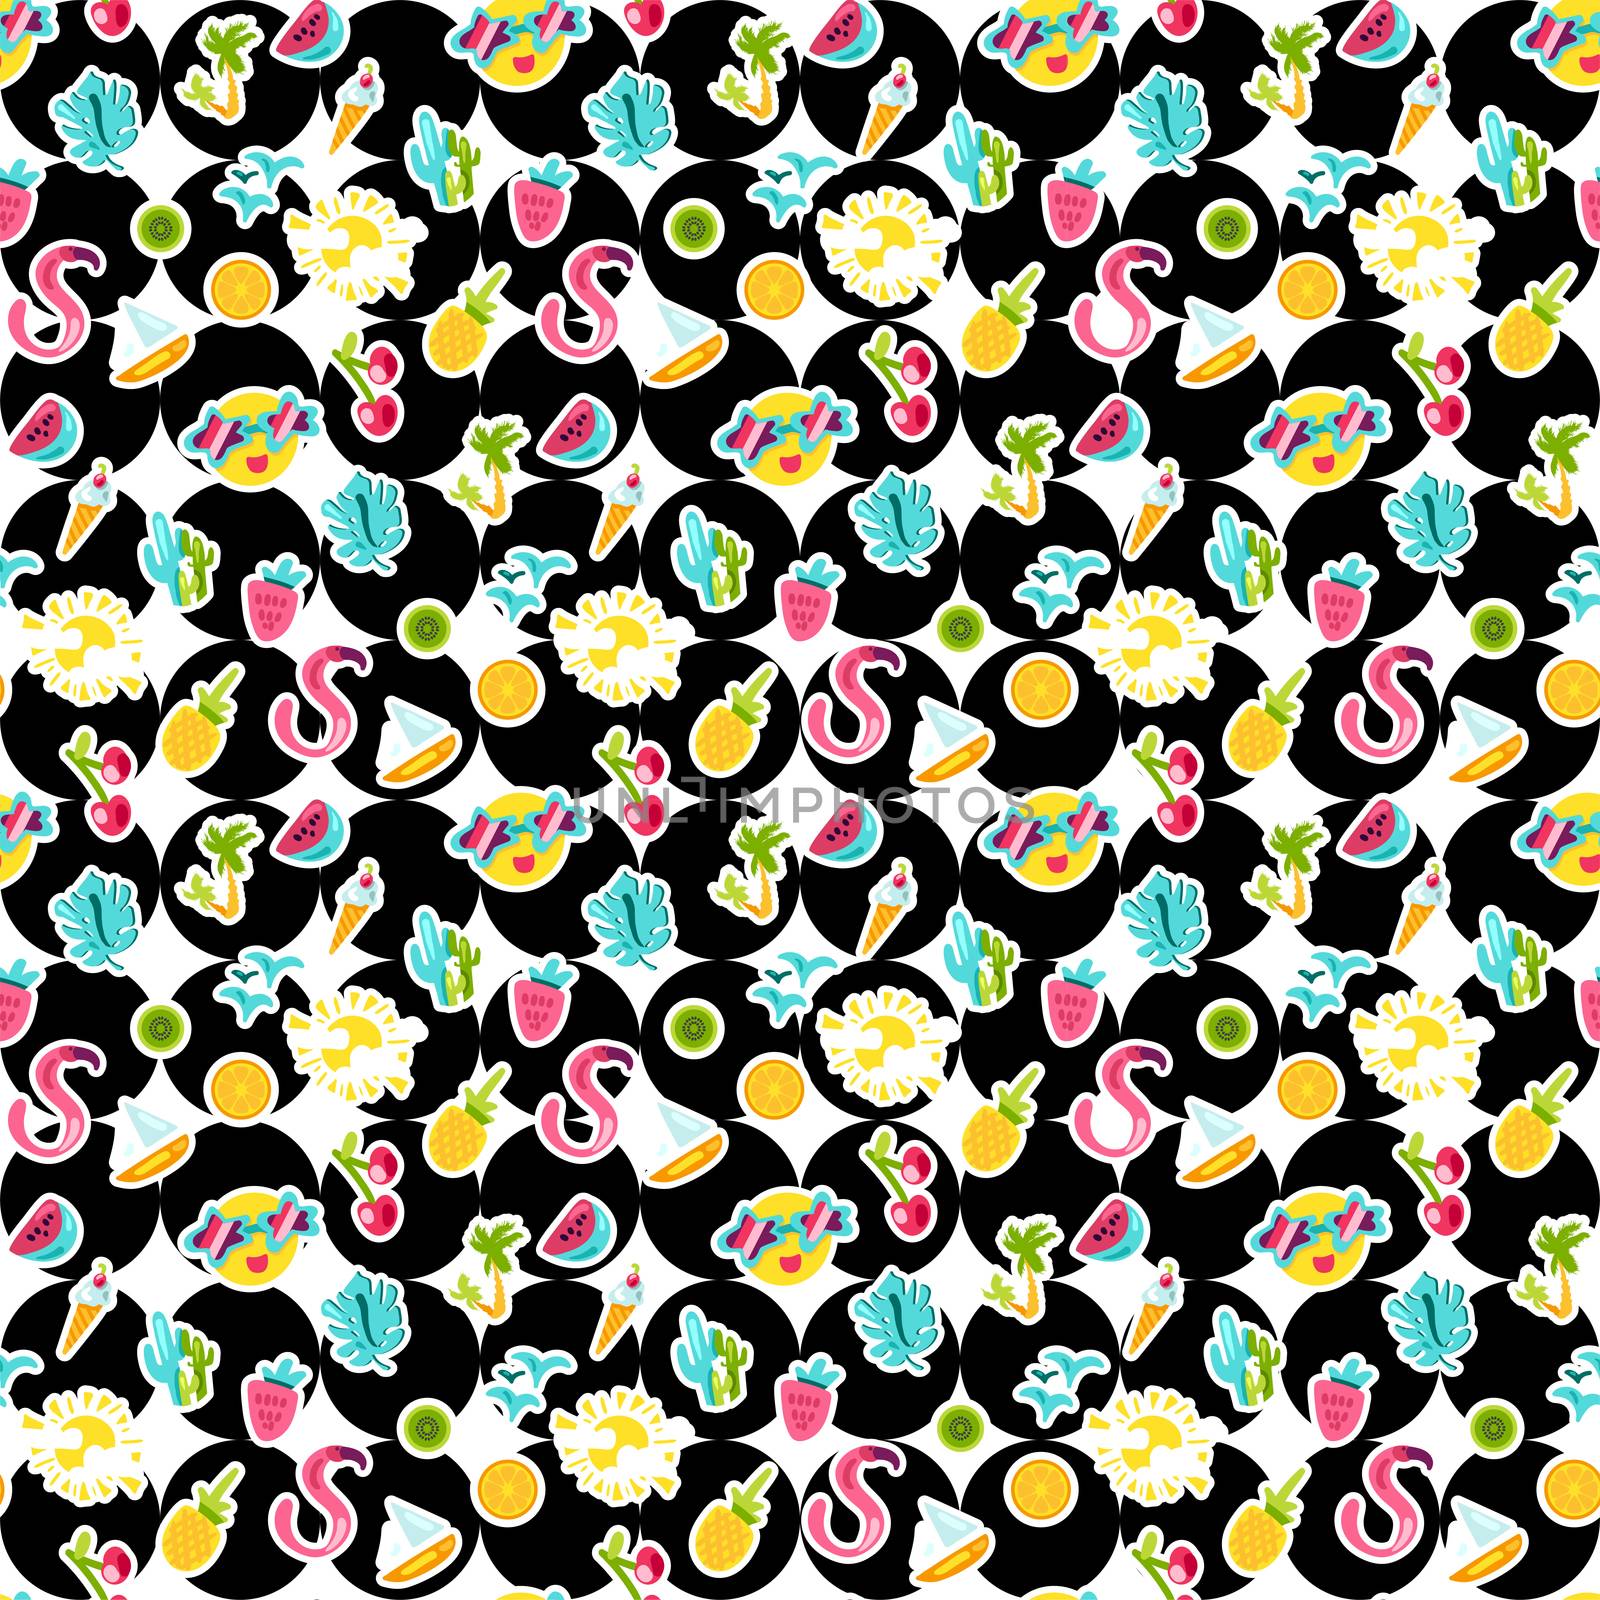 Summer stickers seamless pattern by barsrsind